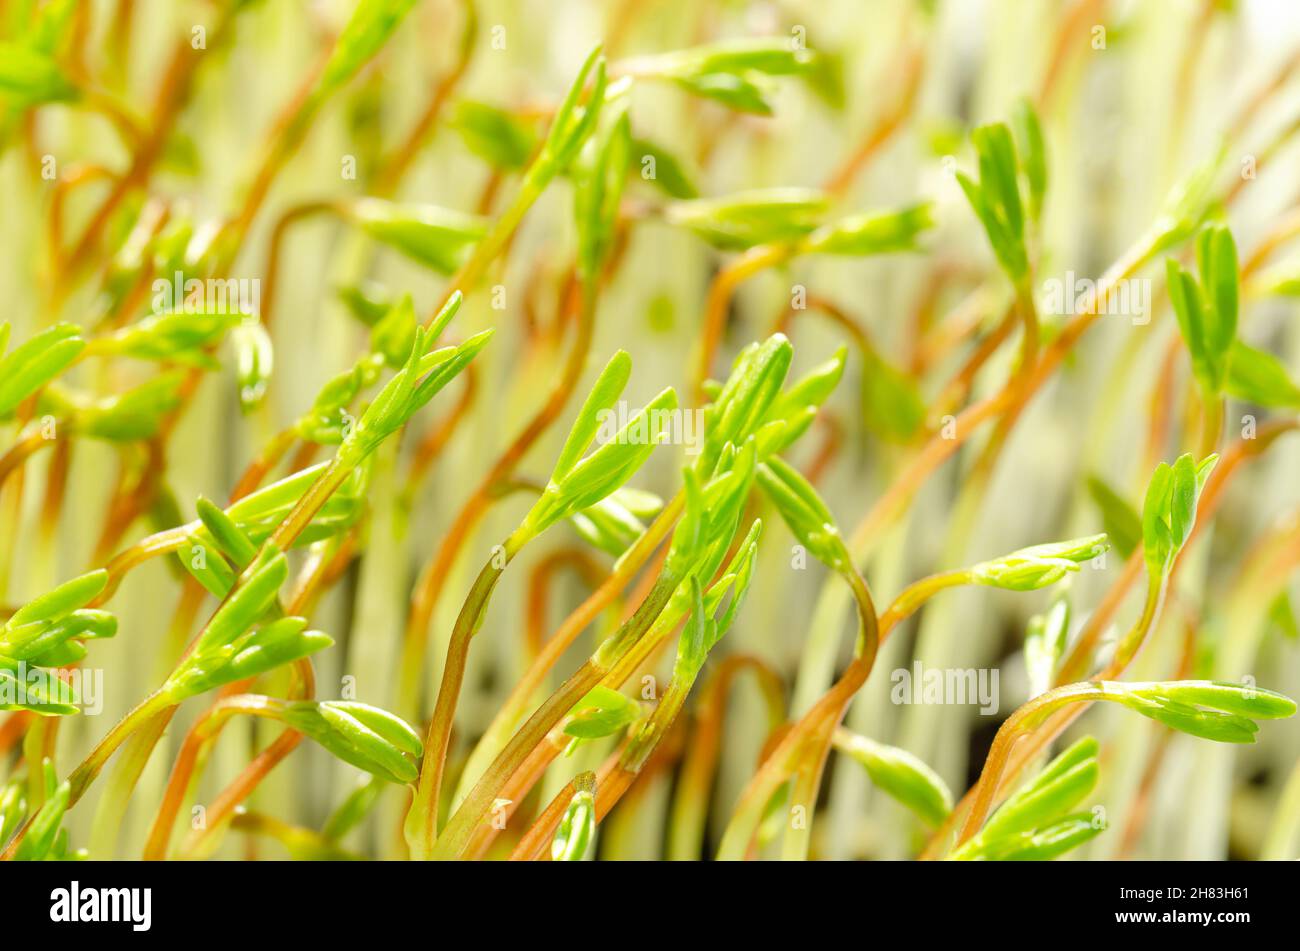 Beluga lentil microgreens, front view, close up. Fresh seedlings of black lentils, Lens culinaris, young plants and shoots of Indianhead lentils. Stock Photo